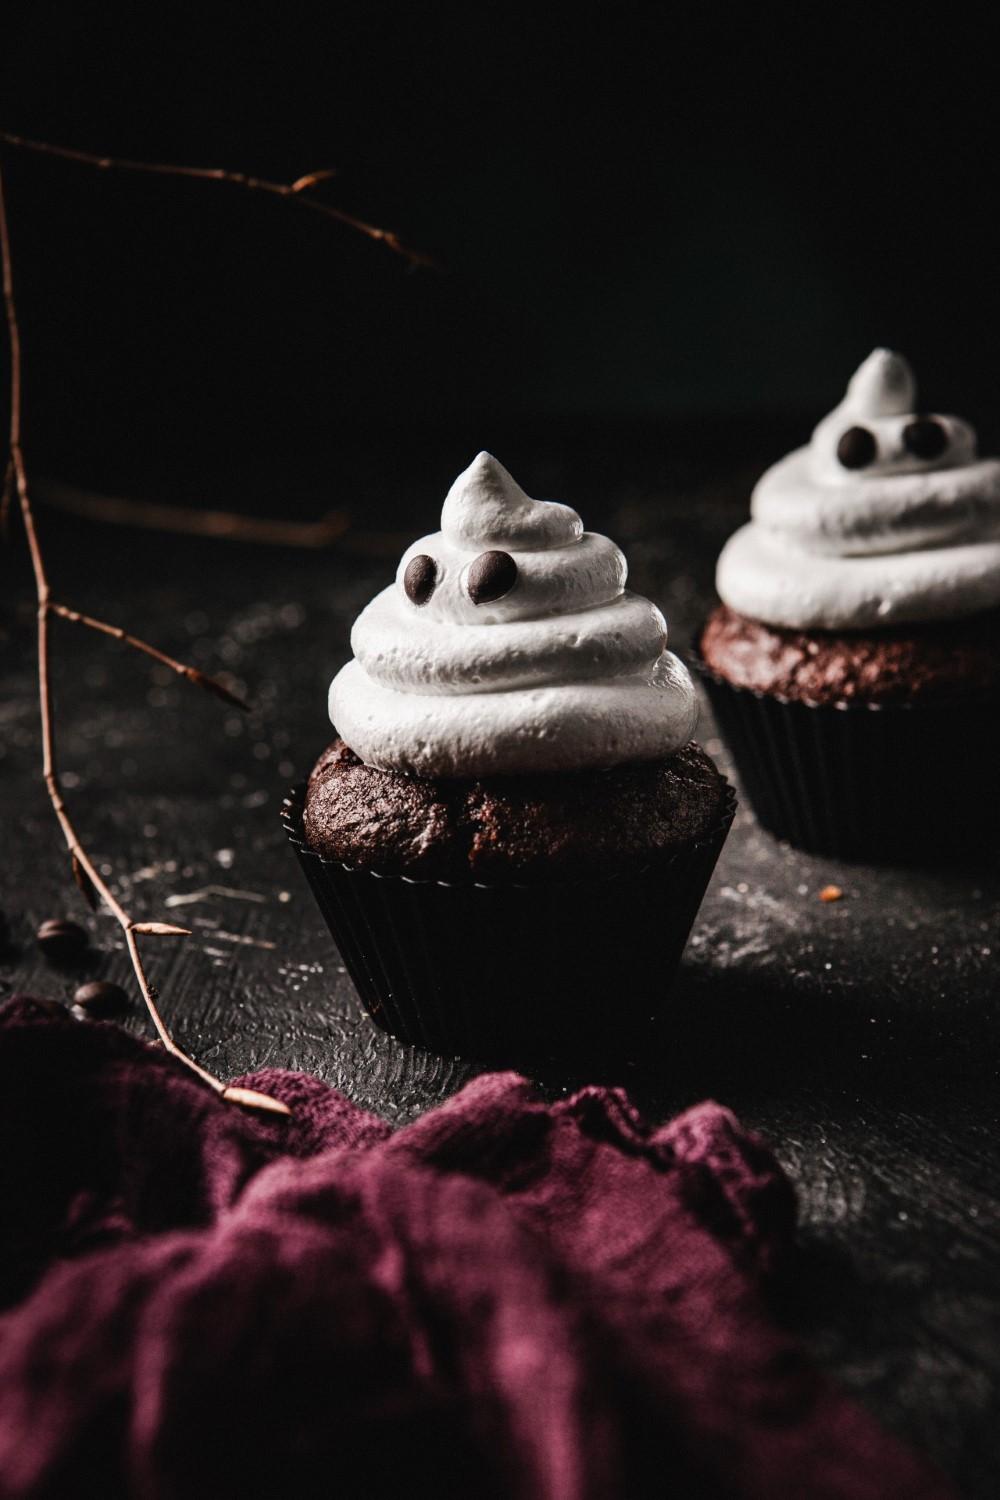 A spooky Halloween recipe - chocolate & meringue ghost cupcakes! Learn how to make these easy and fun decorated cupcakes with a meringue topping and make the spookiest treat of the season.